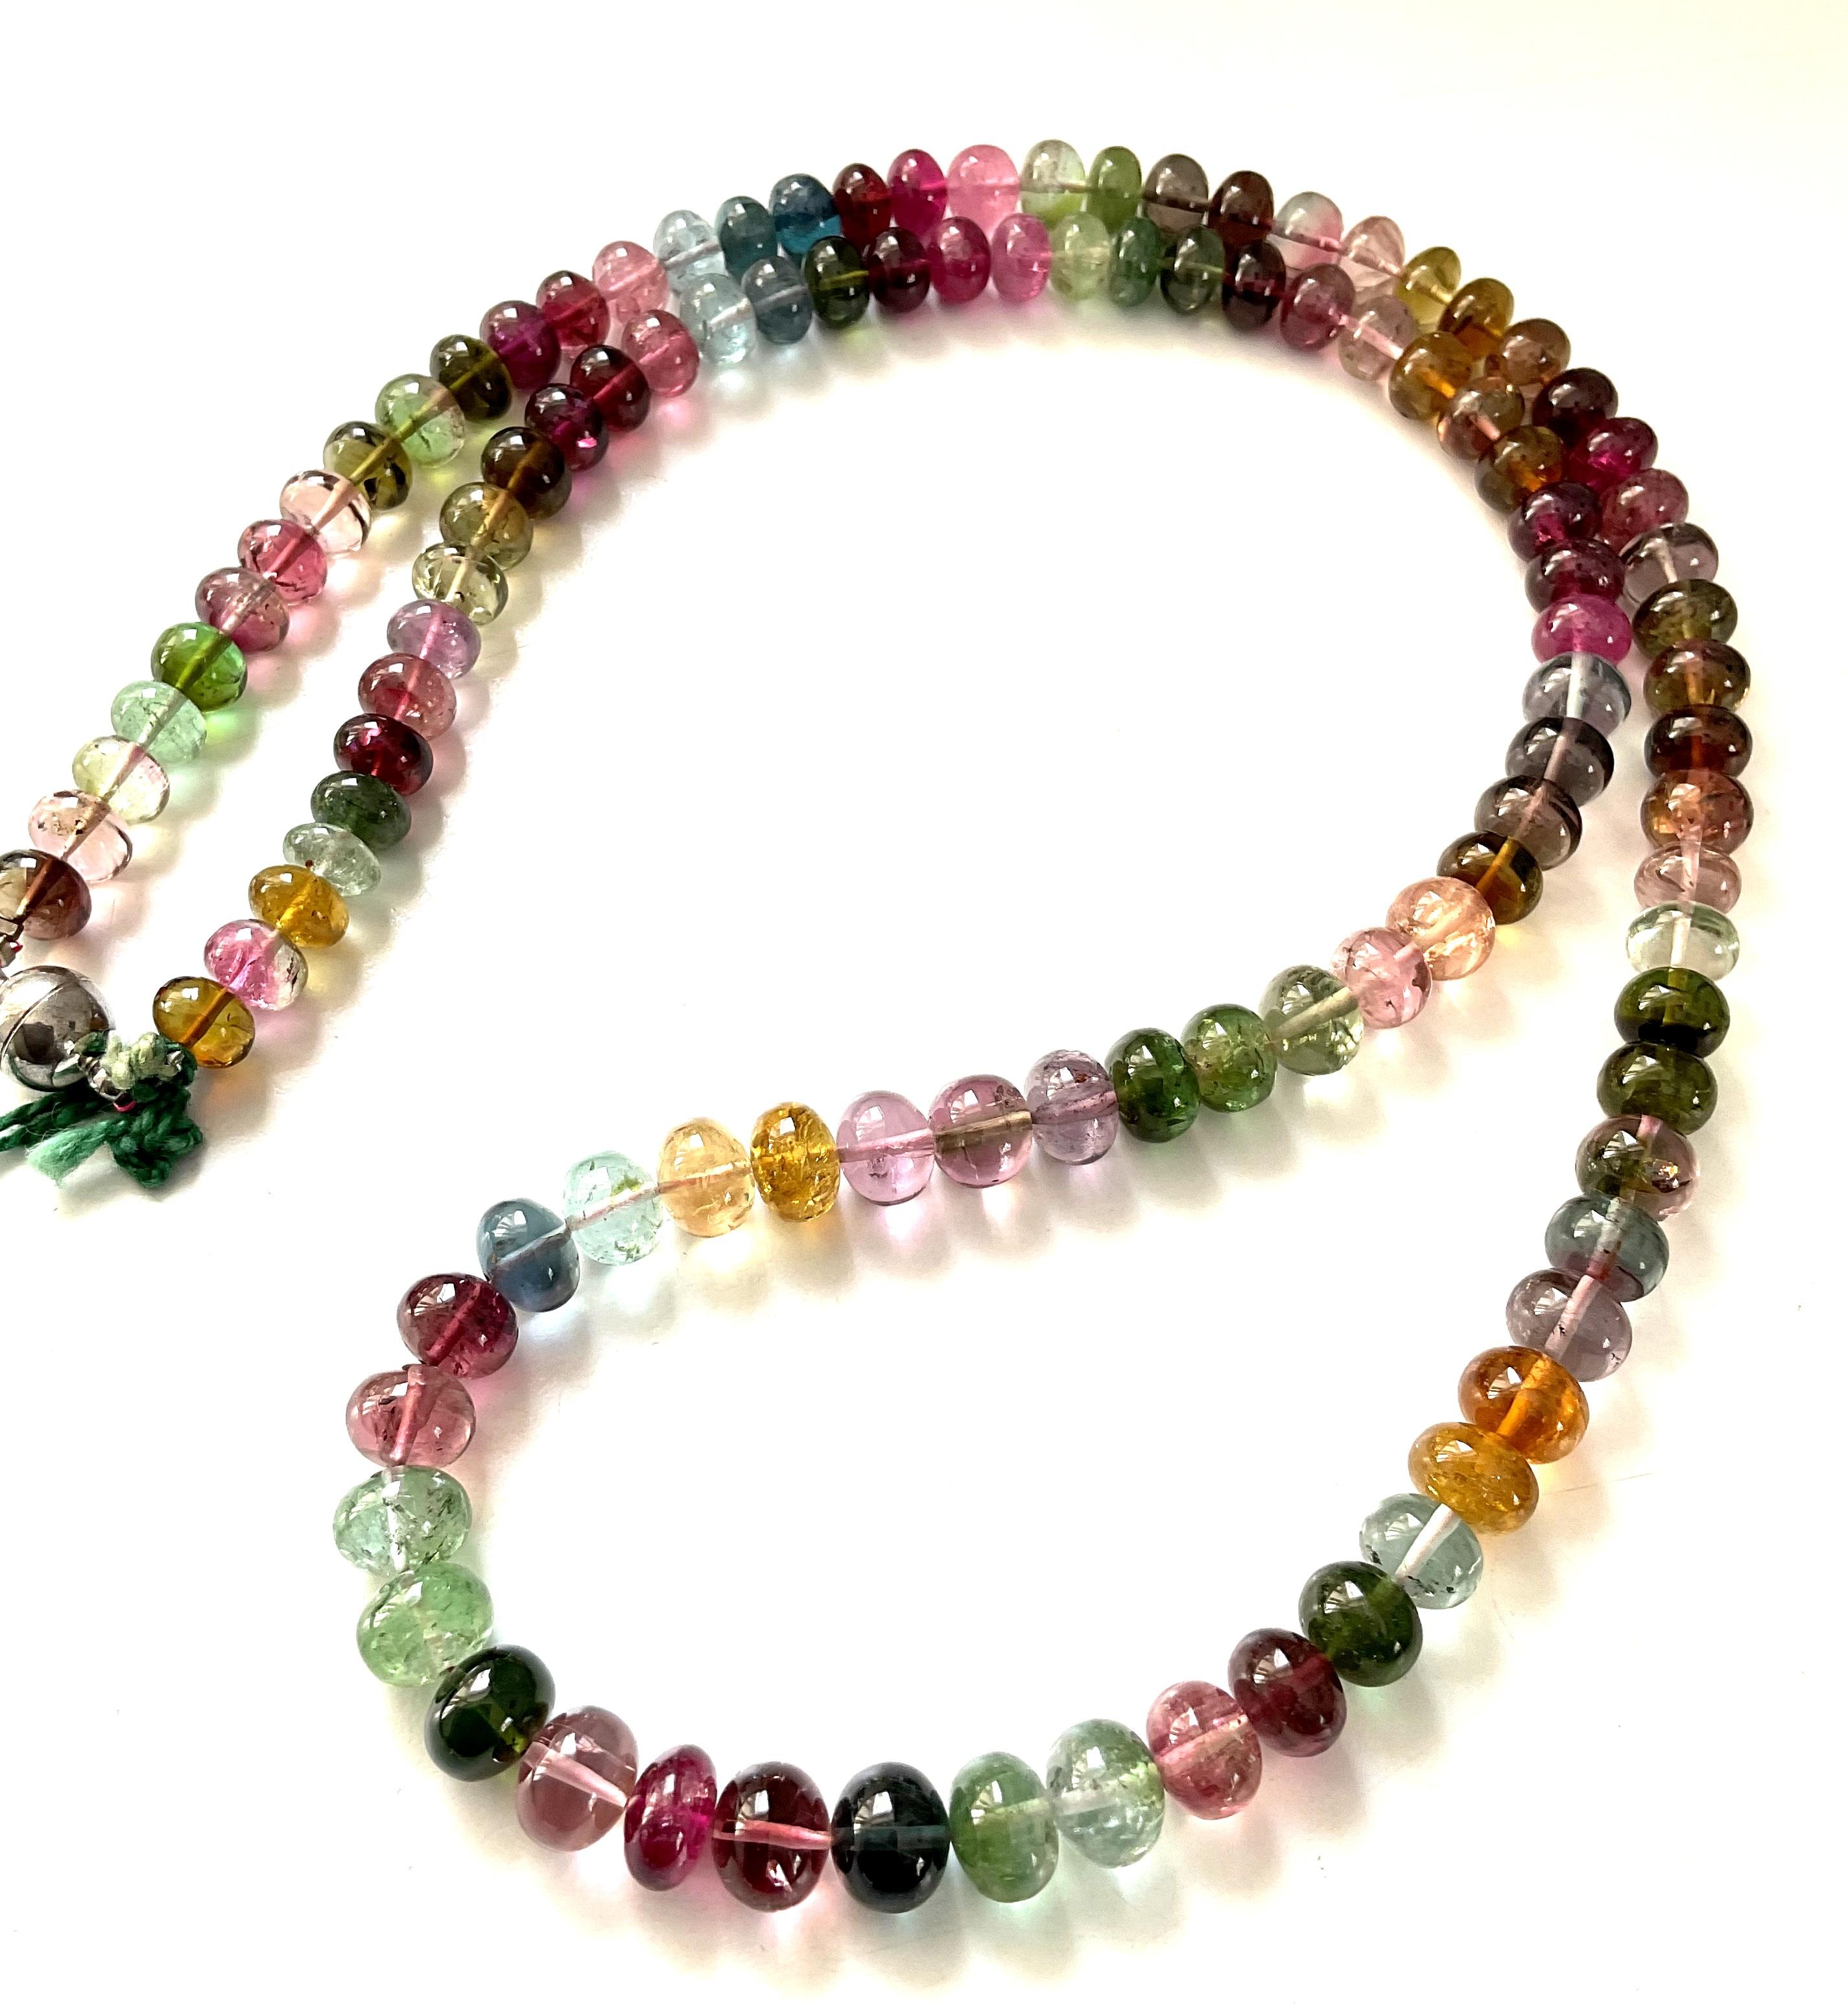 275.50 Carats Multi Tourmaline Plain Beads Necklace For Fine Jewelry For Sale 1